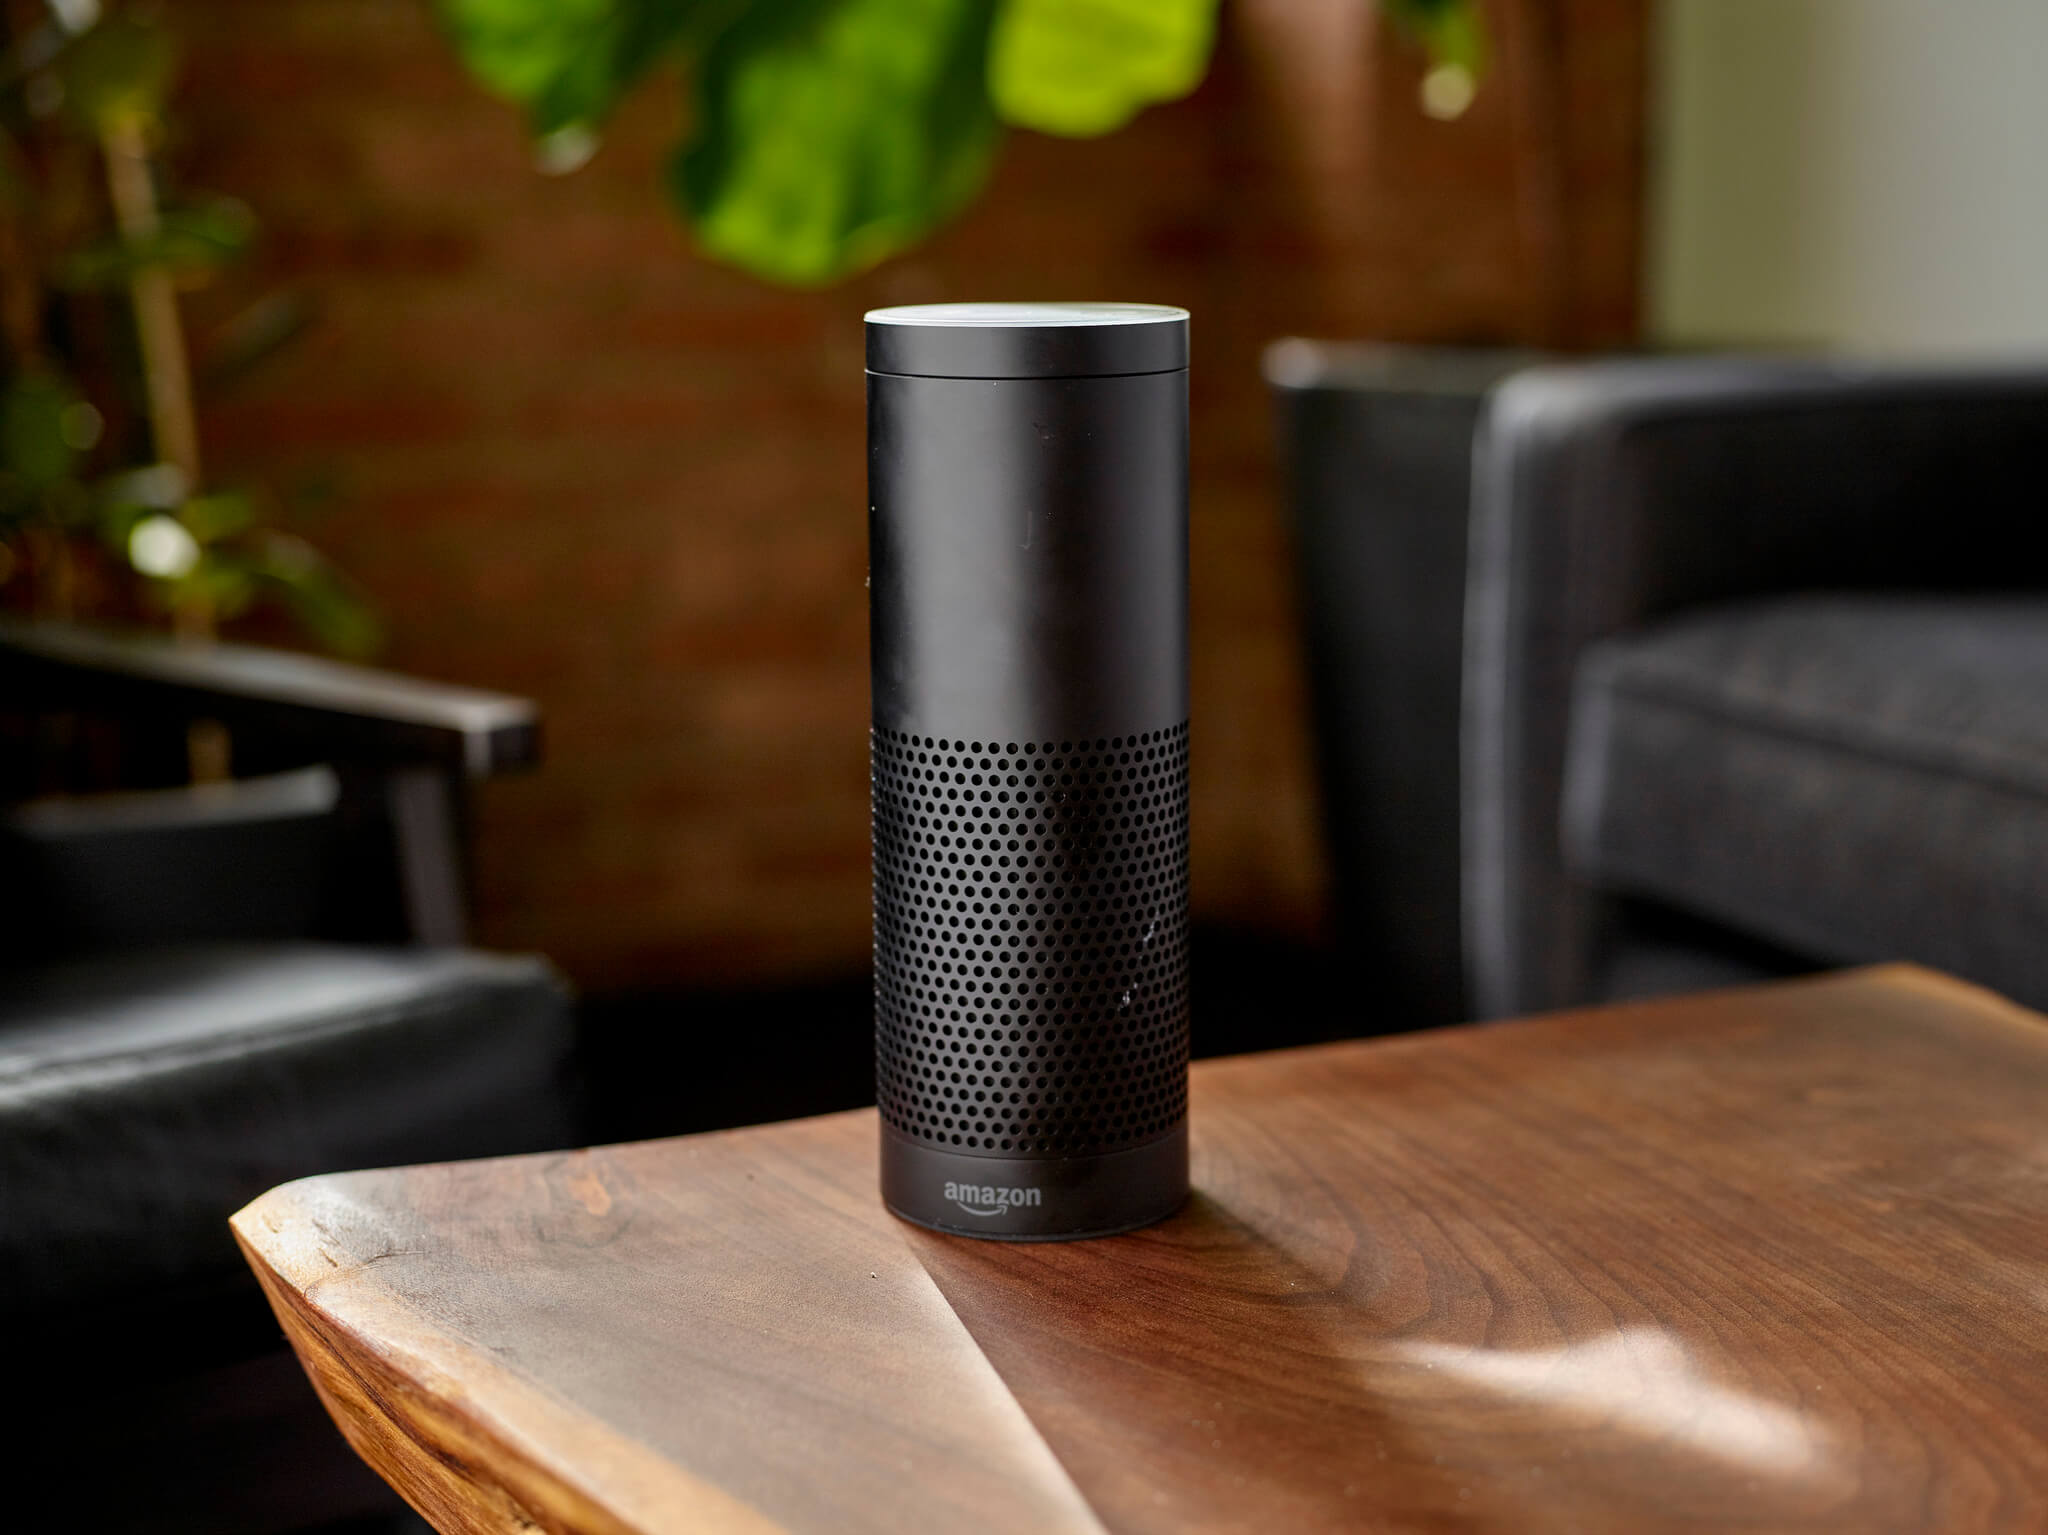 The popularity of voice devices is increasing at a staggering rate